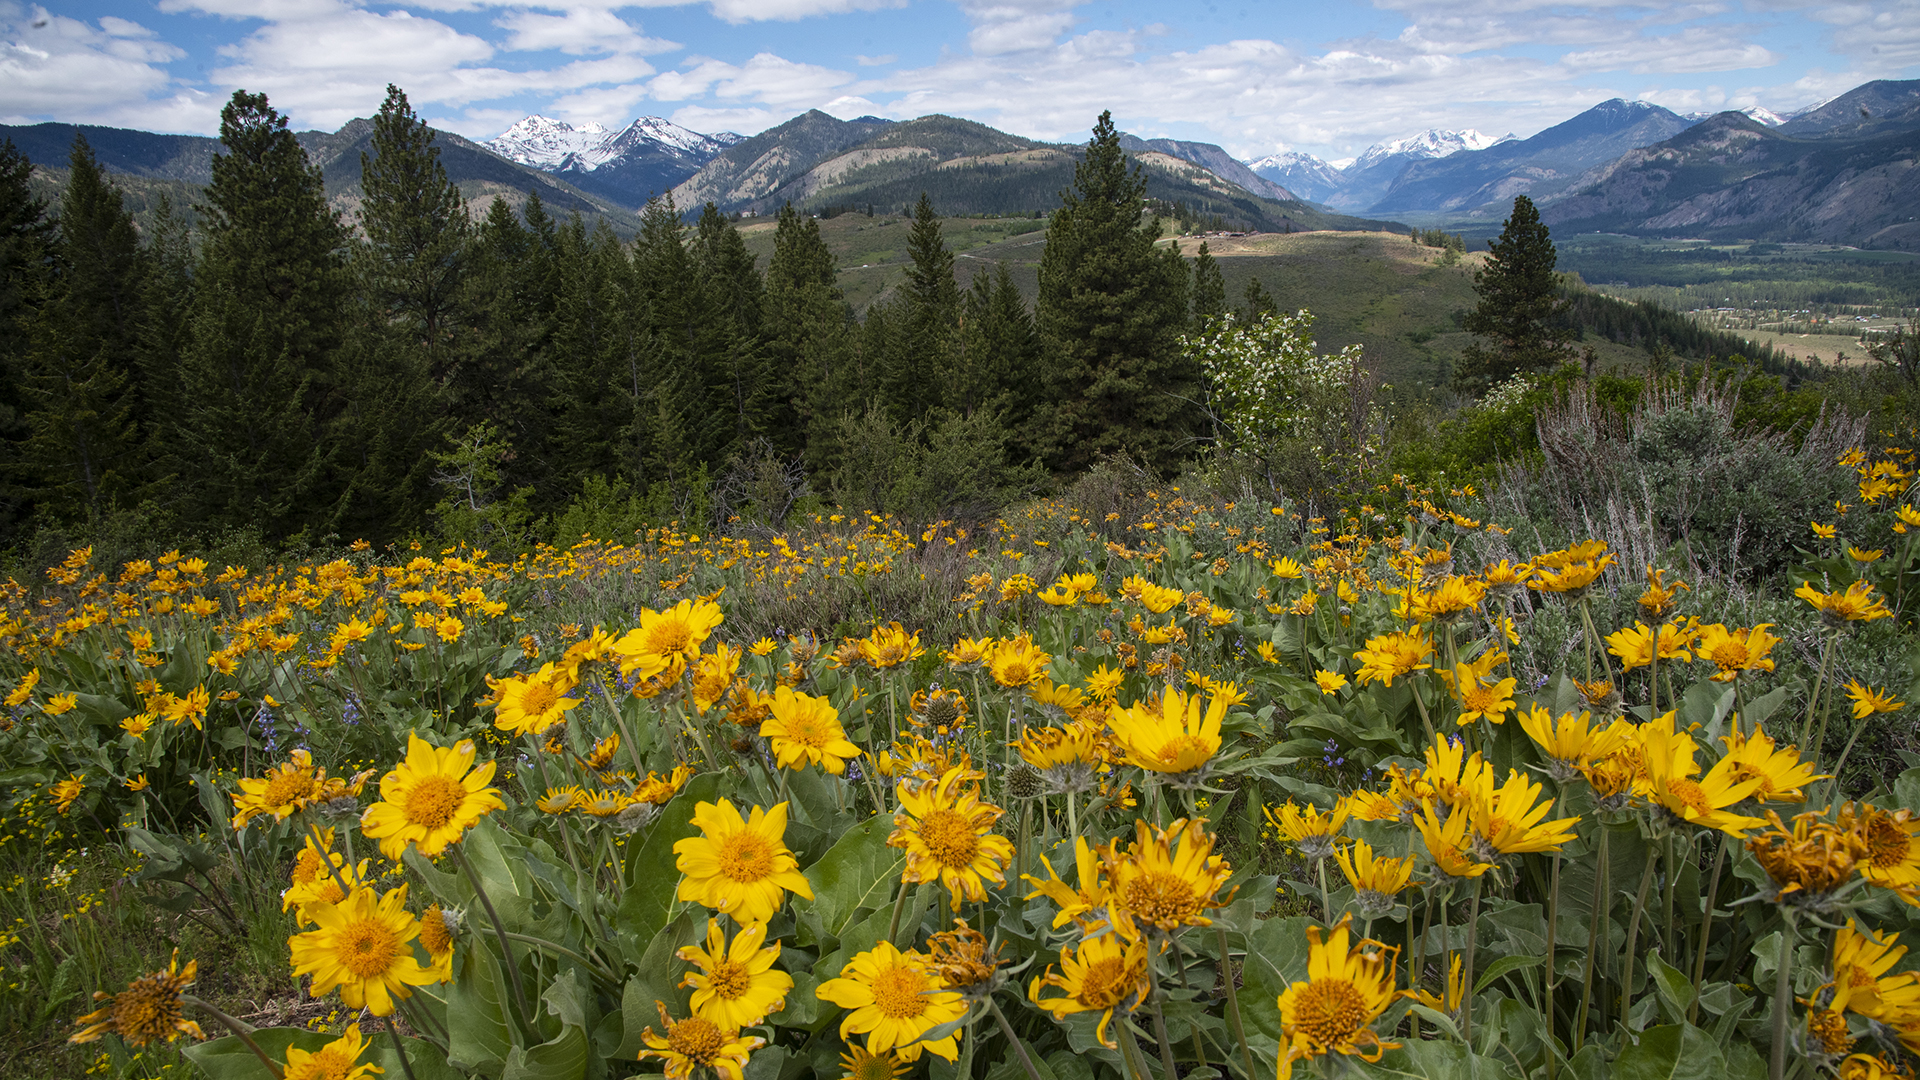 Driving the Cascade Loop in the spring offers the best chance to experience Arrowleaf Balsamroots in bloom.